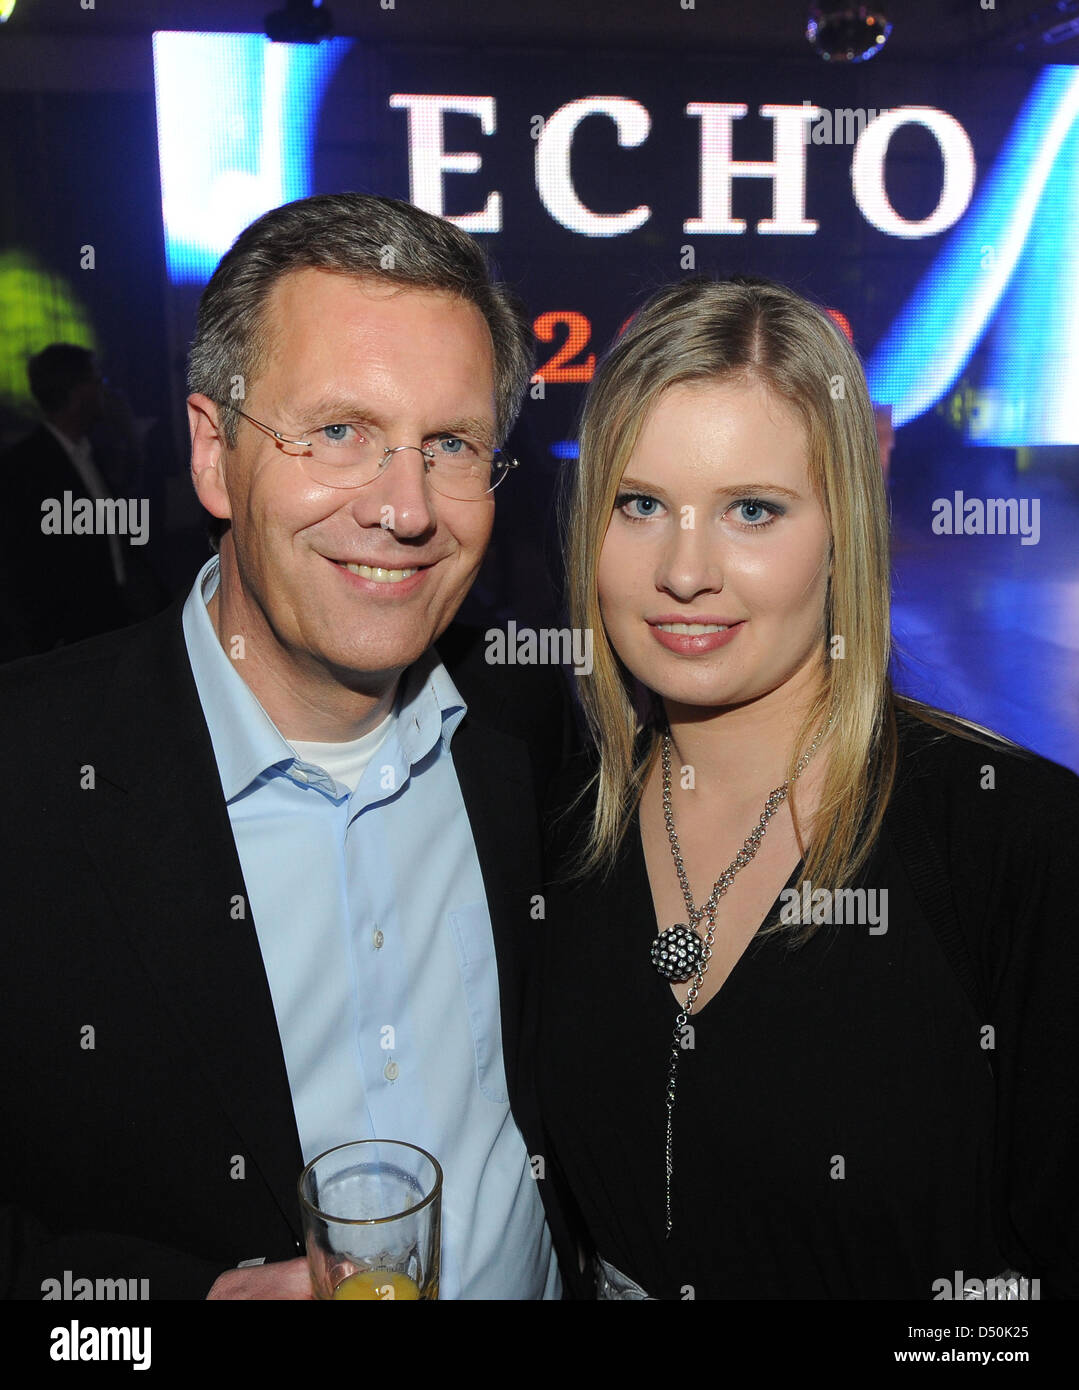 A file picture taken on 21 February 2009 shows Christian Wulff, now German President and at the time Prime Minister of Lower SAxony, together with his daughter Annalena during the ECHO music event in Berlin, Germany. Wulff's 17-year-old daughter accompanies Mr Wulff on his four-day visit to Israel in stead of his wife Bettina. The choice of travel companion is supposed to symbolize Stock Photo